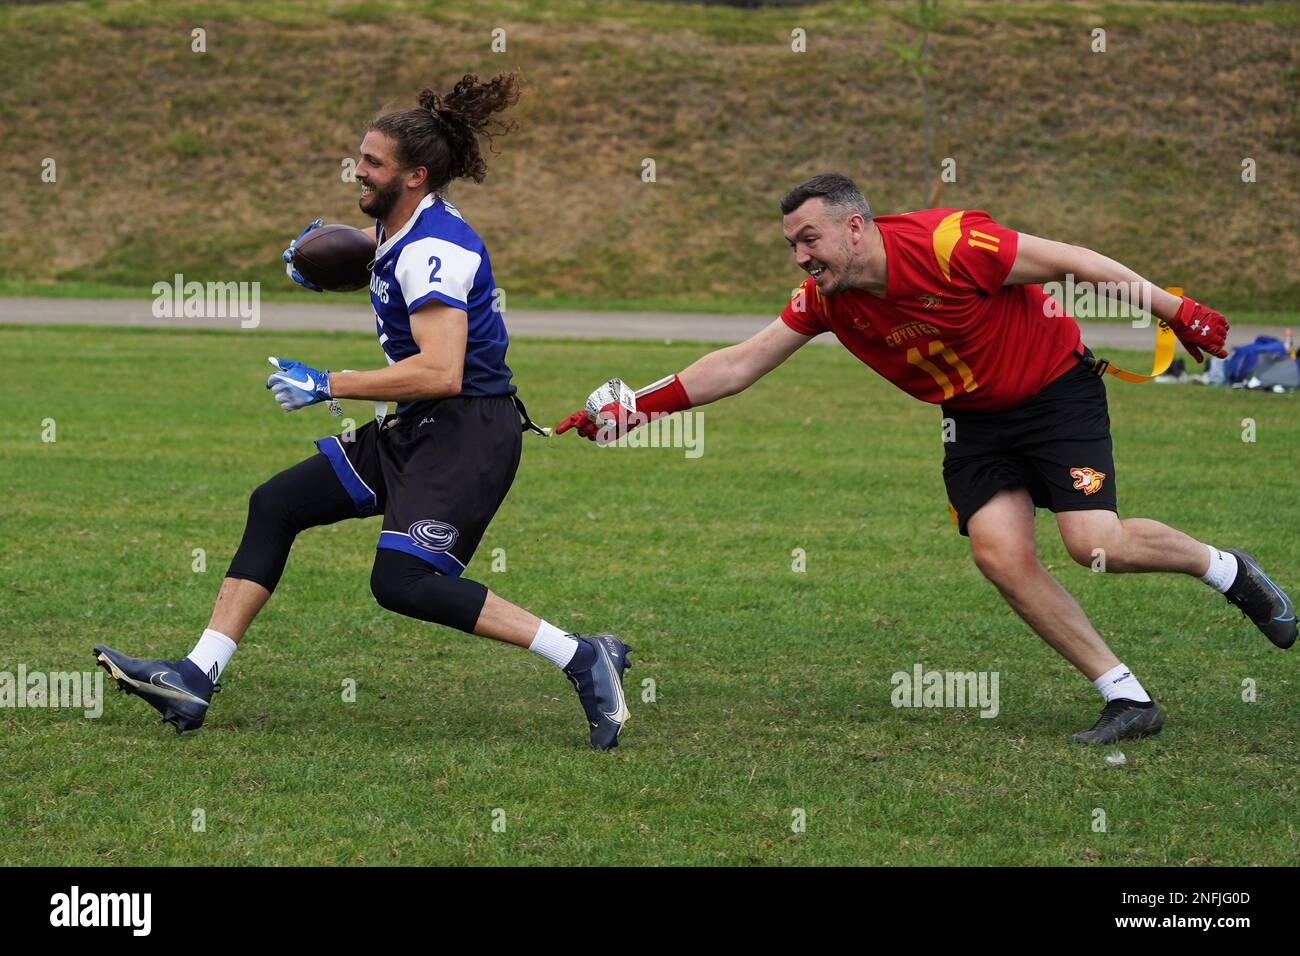 Welsh Bowl 2022 - American Flag Football in South Wales Stock Photo